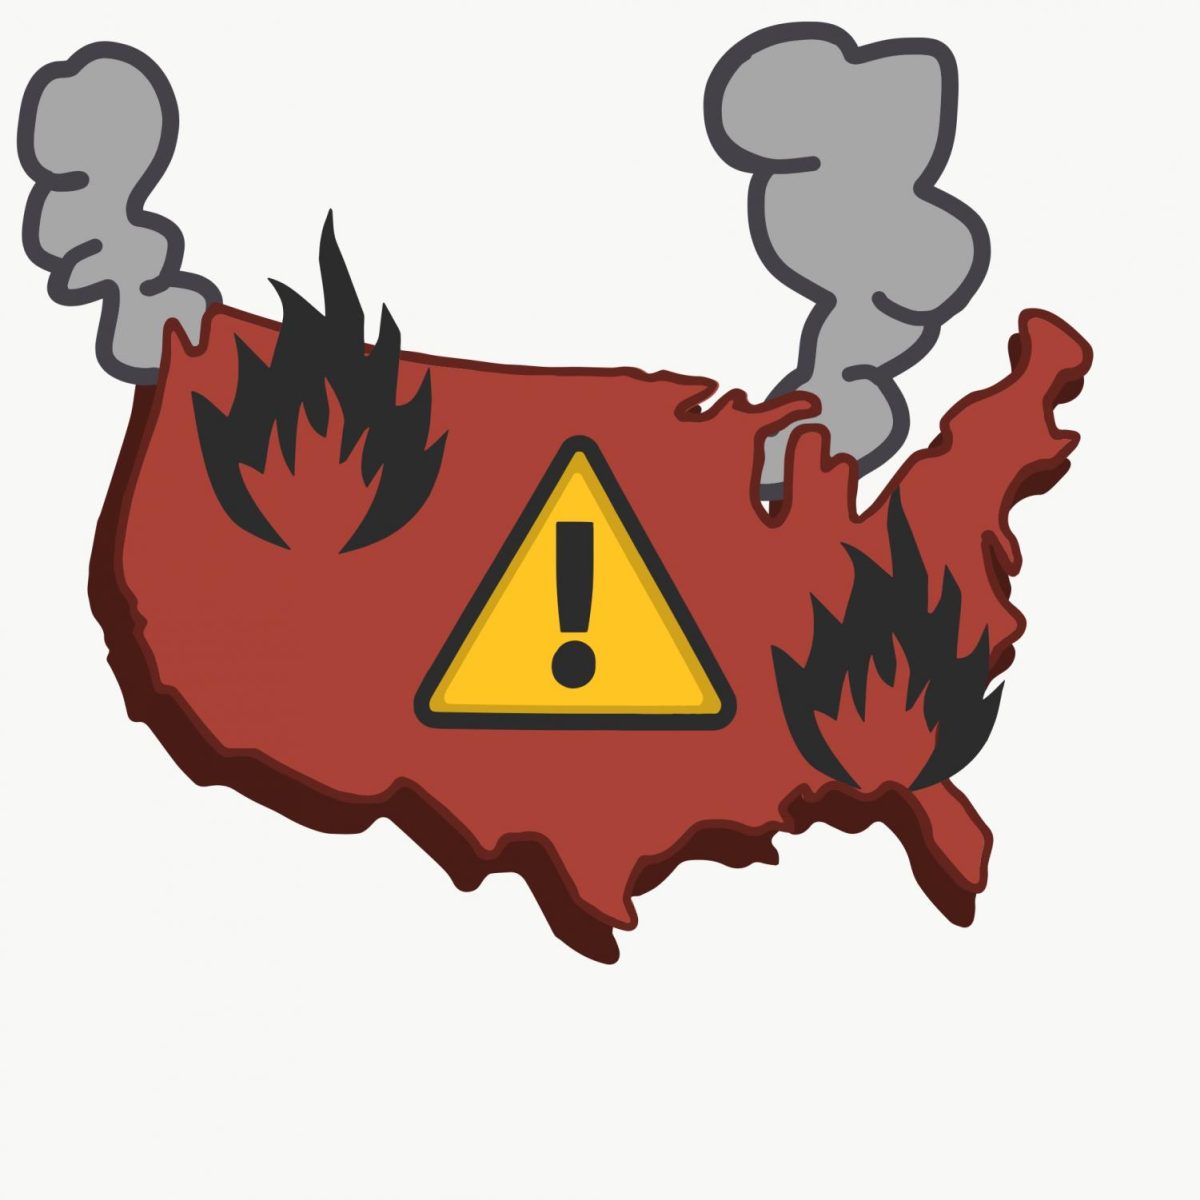 An image of the United States on fire with the caution symbol, yellow triangle and exclamation point, in the middle.